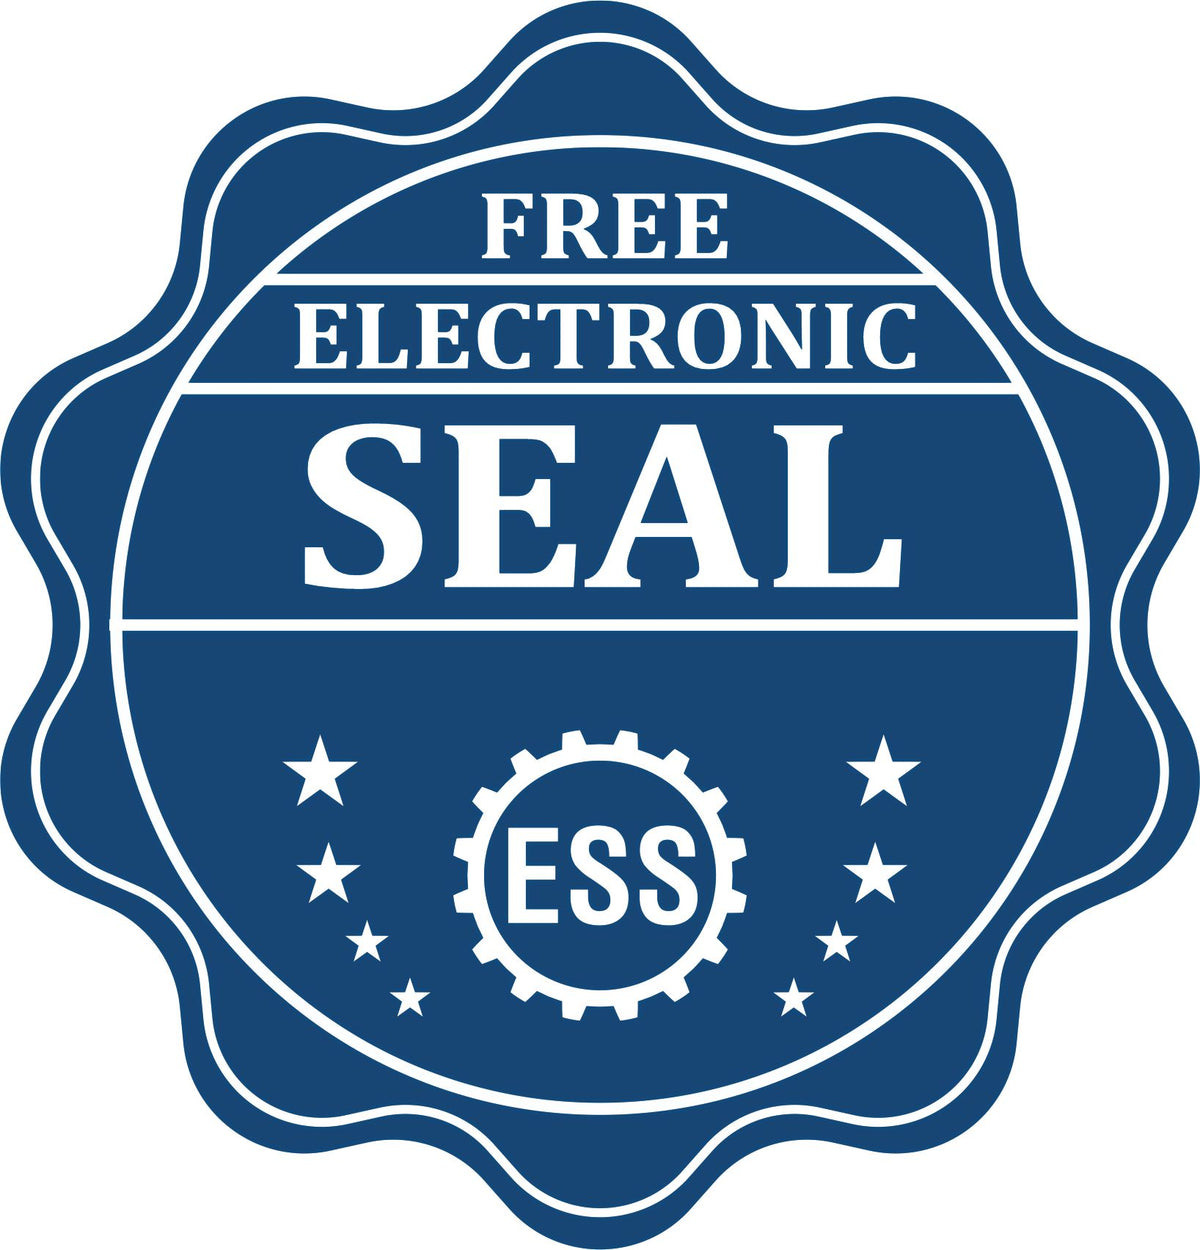 A badge showing a free electronic seal for the Hybrid Montana Engineer Seal with stars and the ESS gear on the emblem.